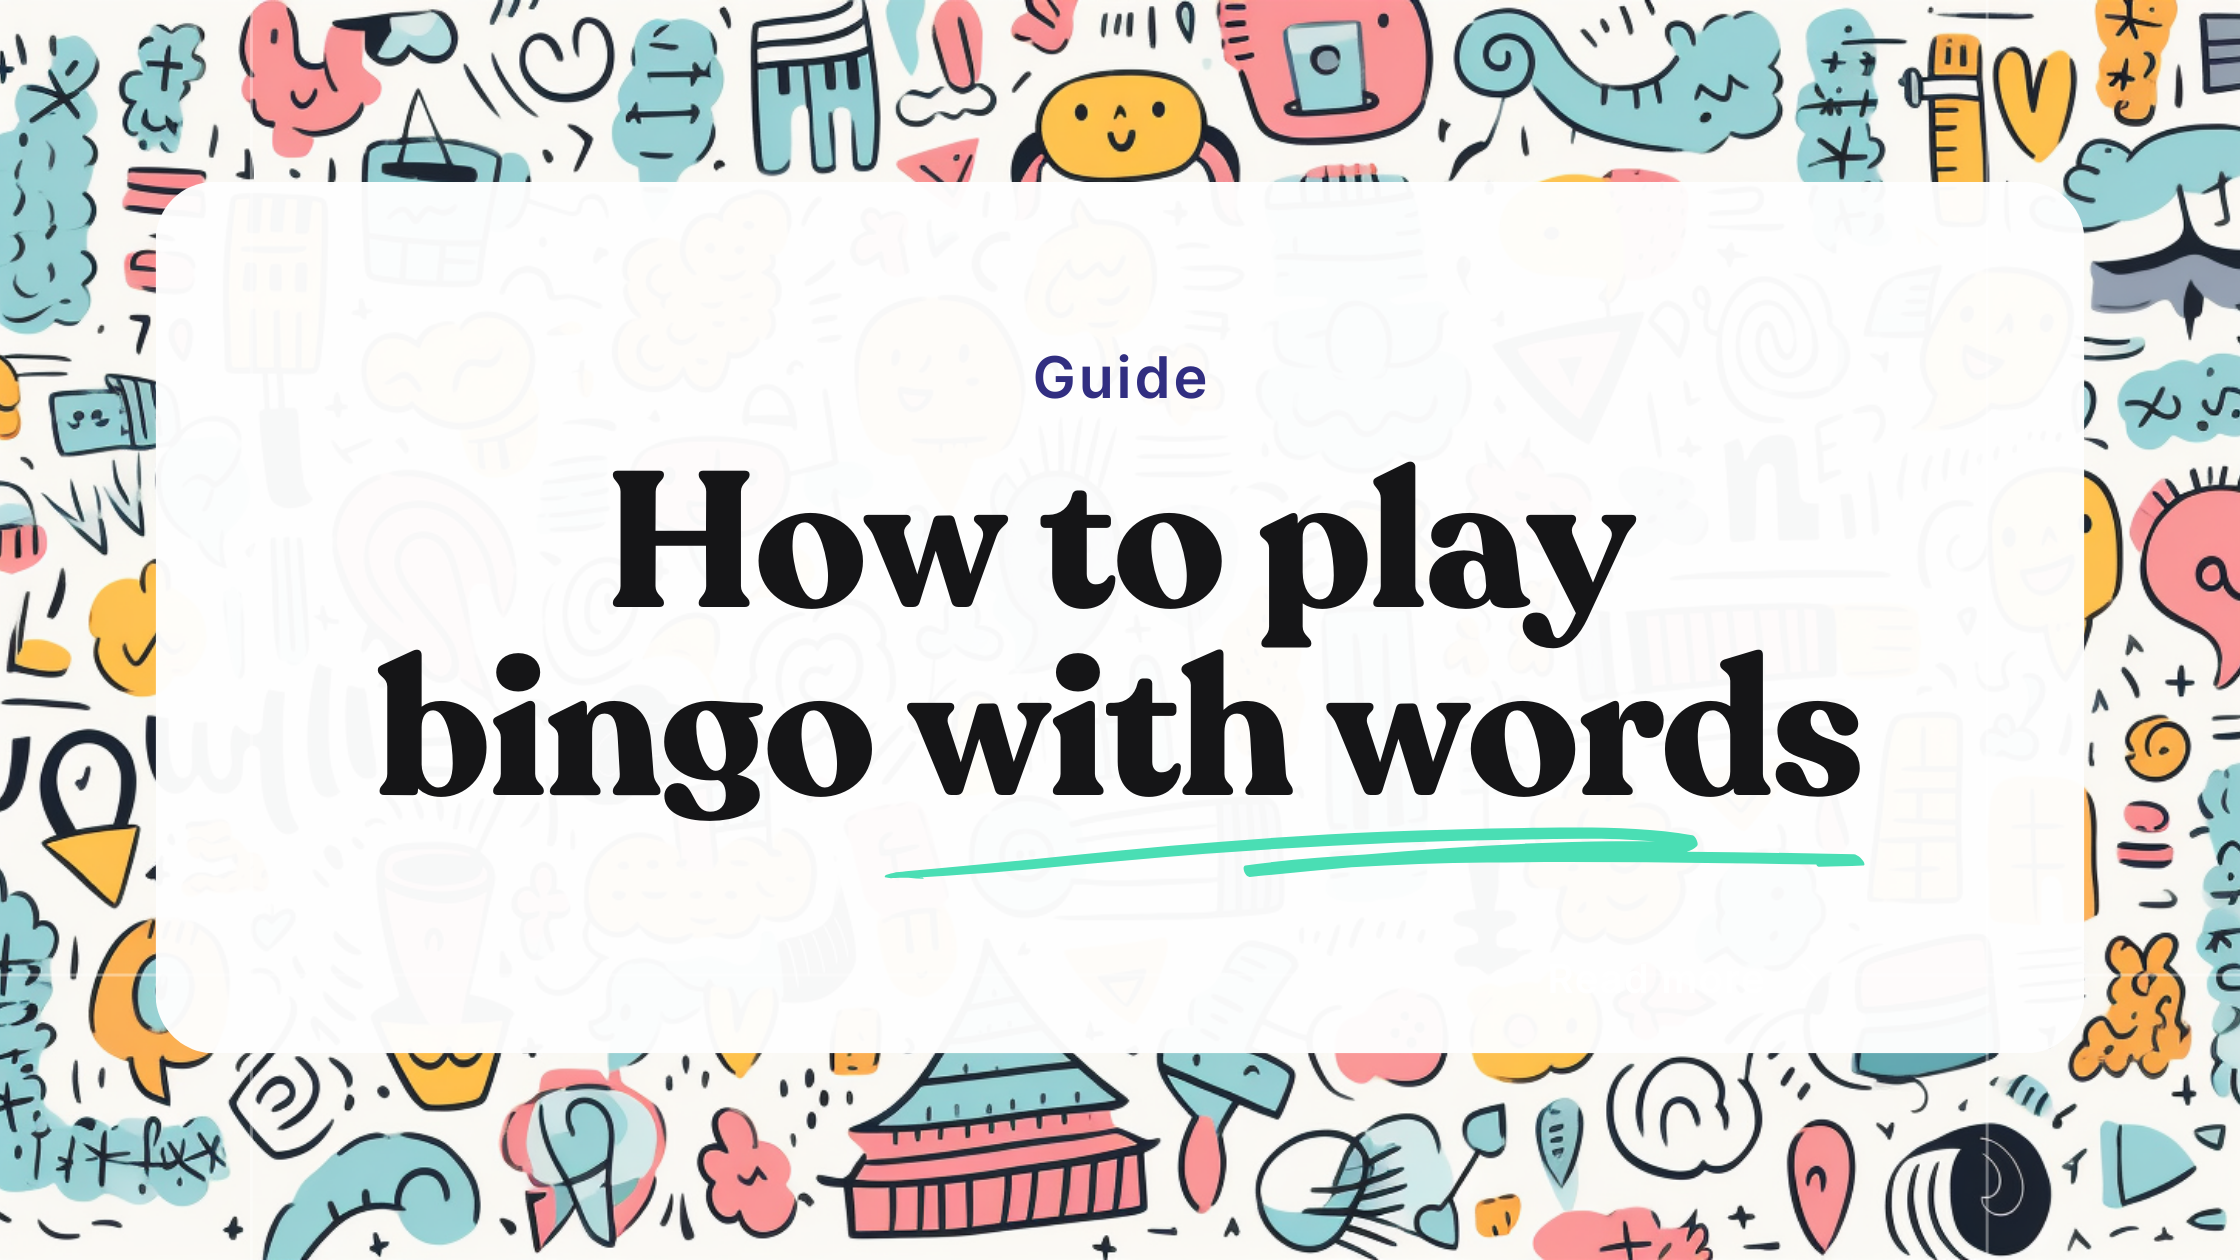 How to play bingo with words